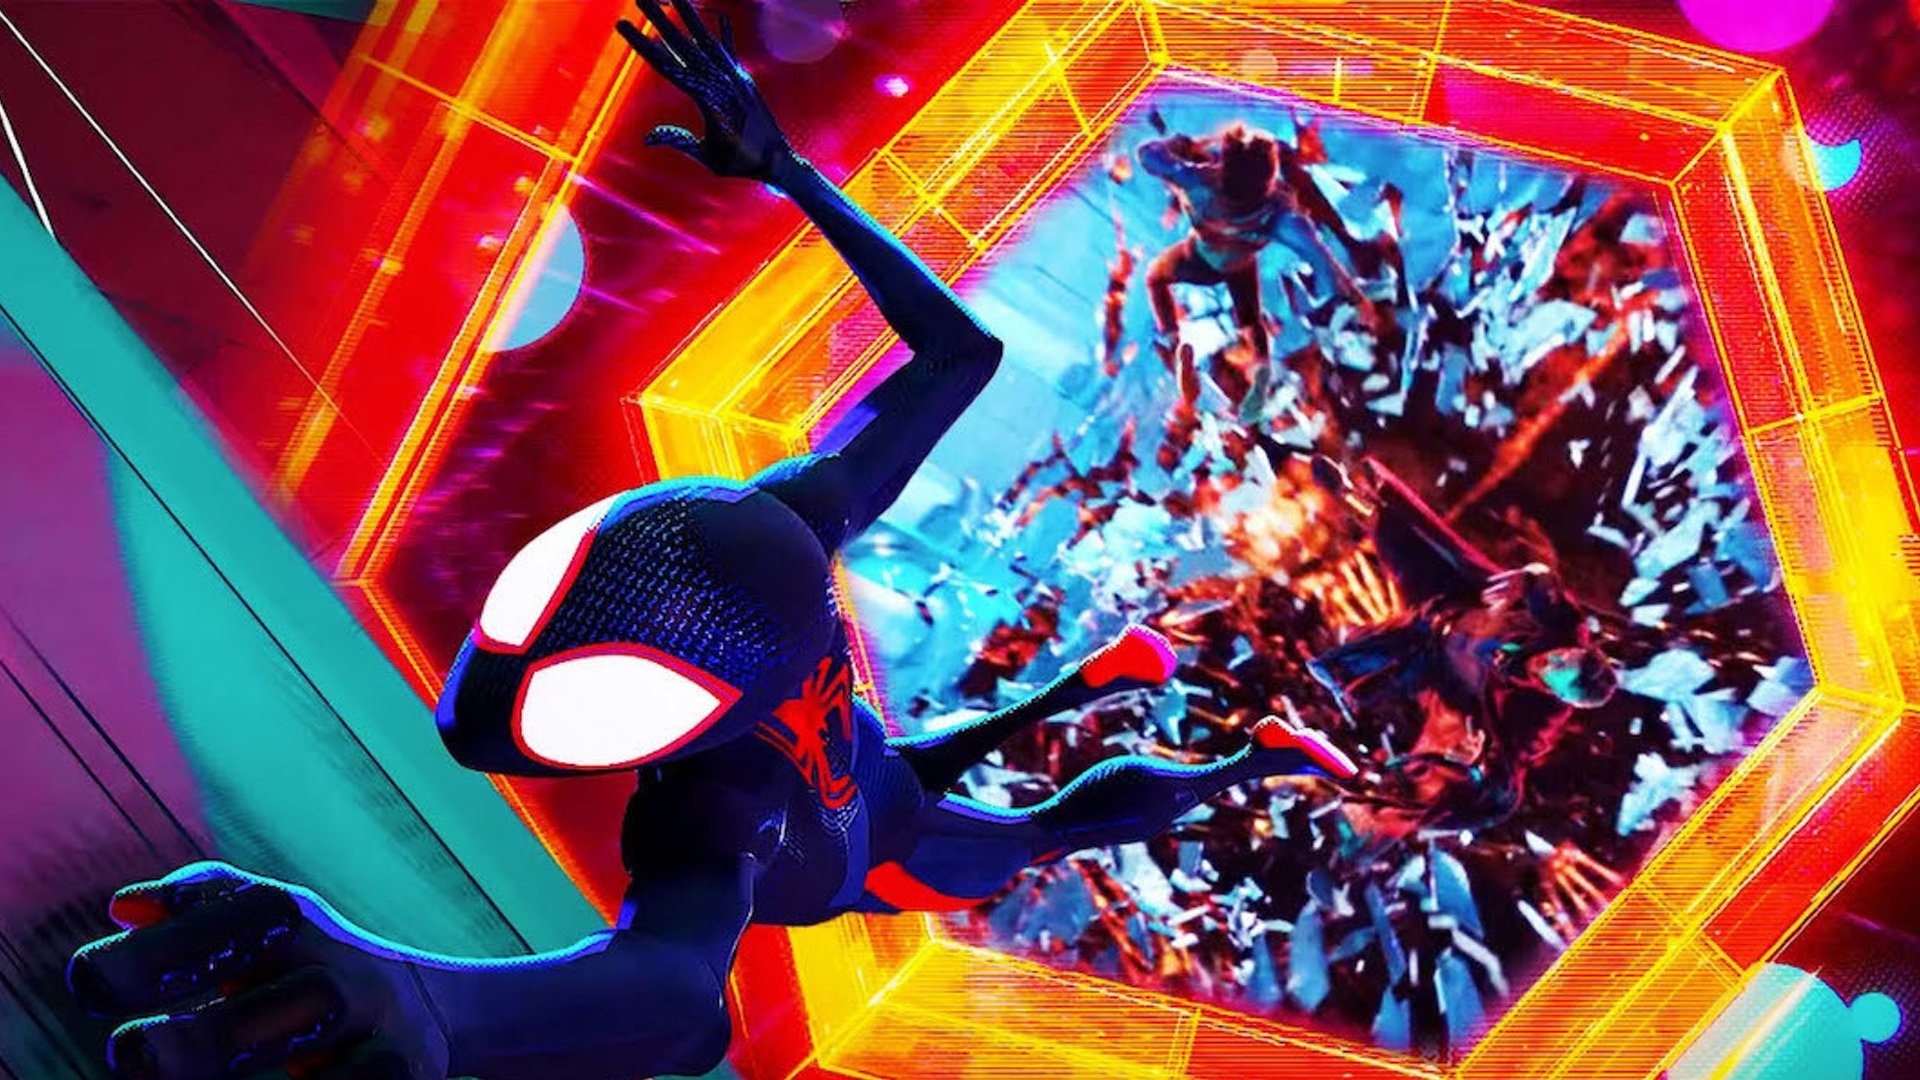 Spider-Man: Across the Spider-Verse Cast and Character Guide